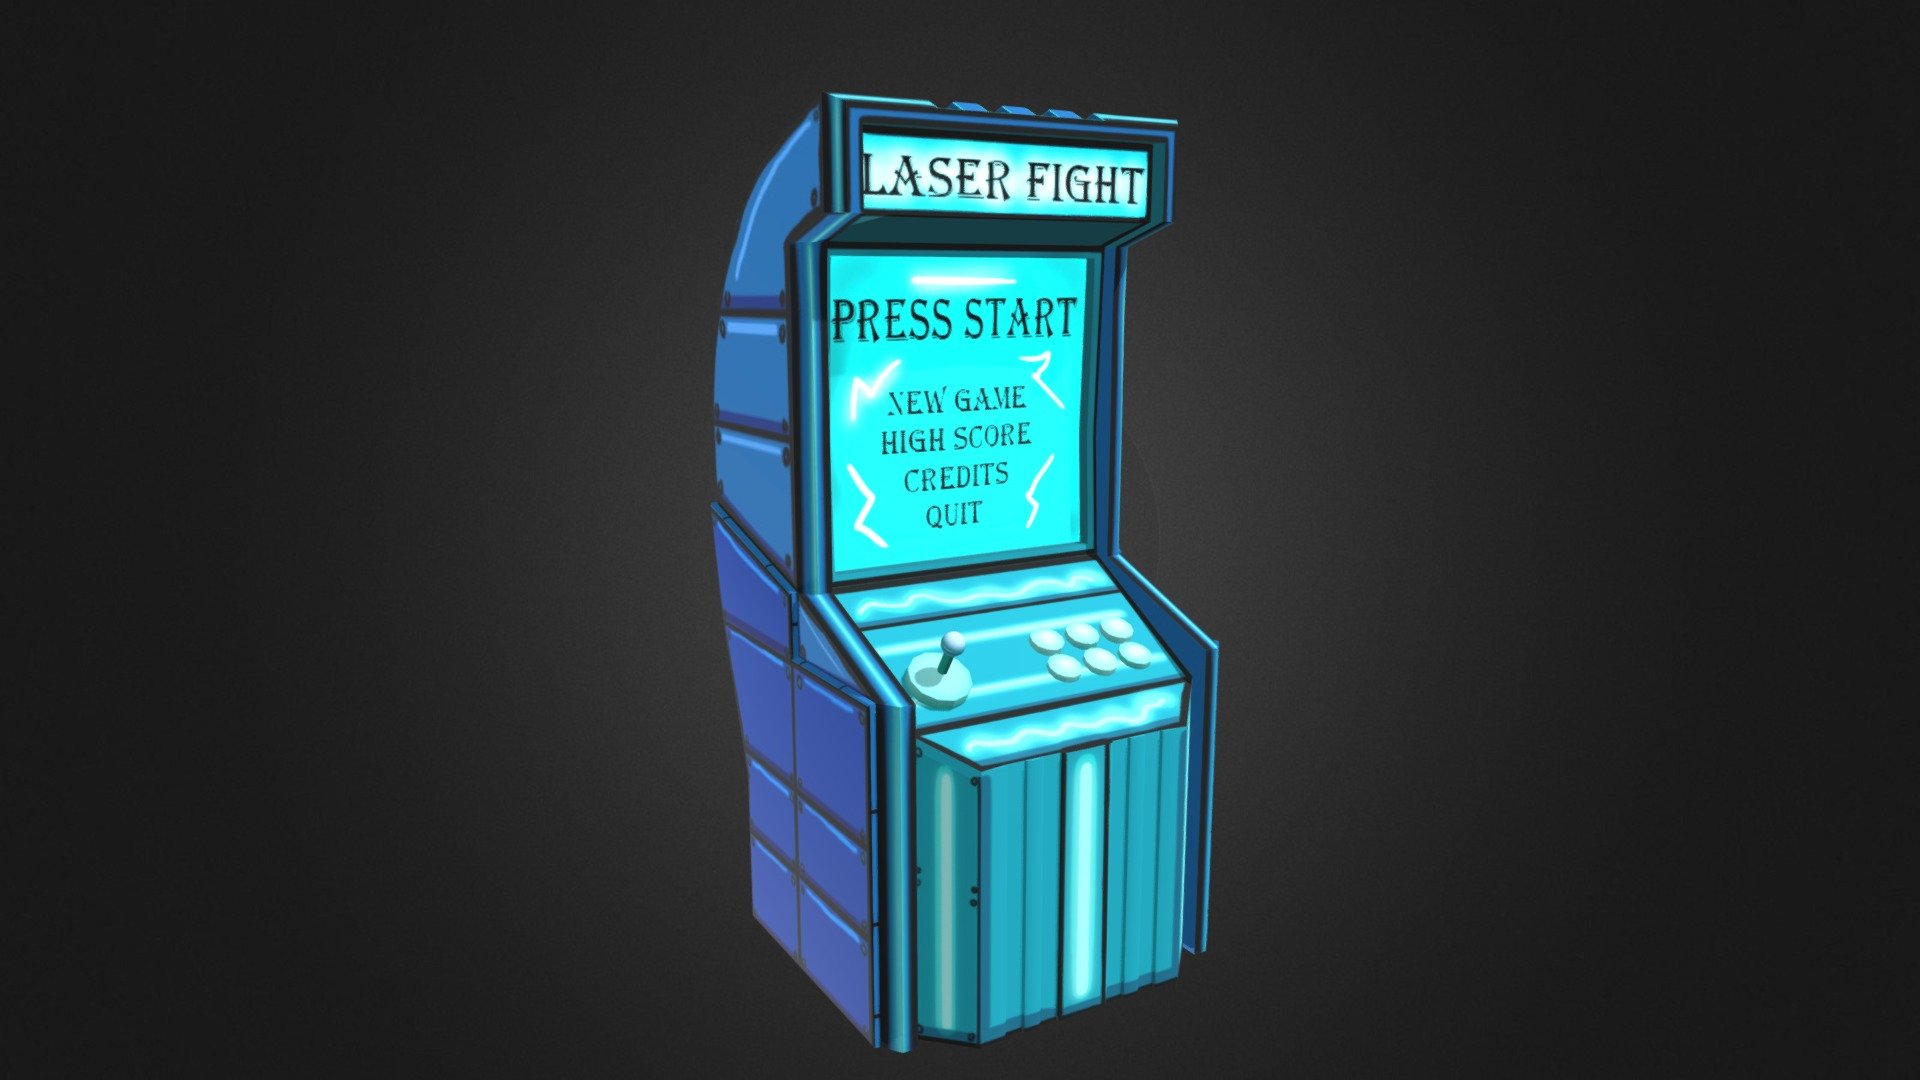 Laser fight Arcade - Download Free 3D model by Sekerio [d32cc81 ...